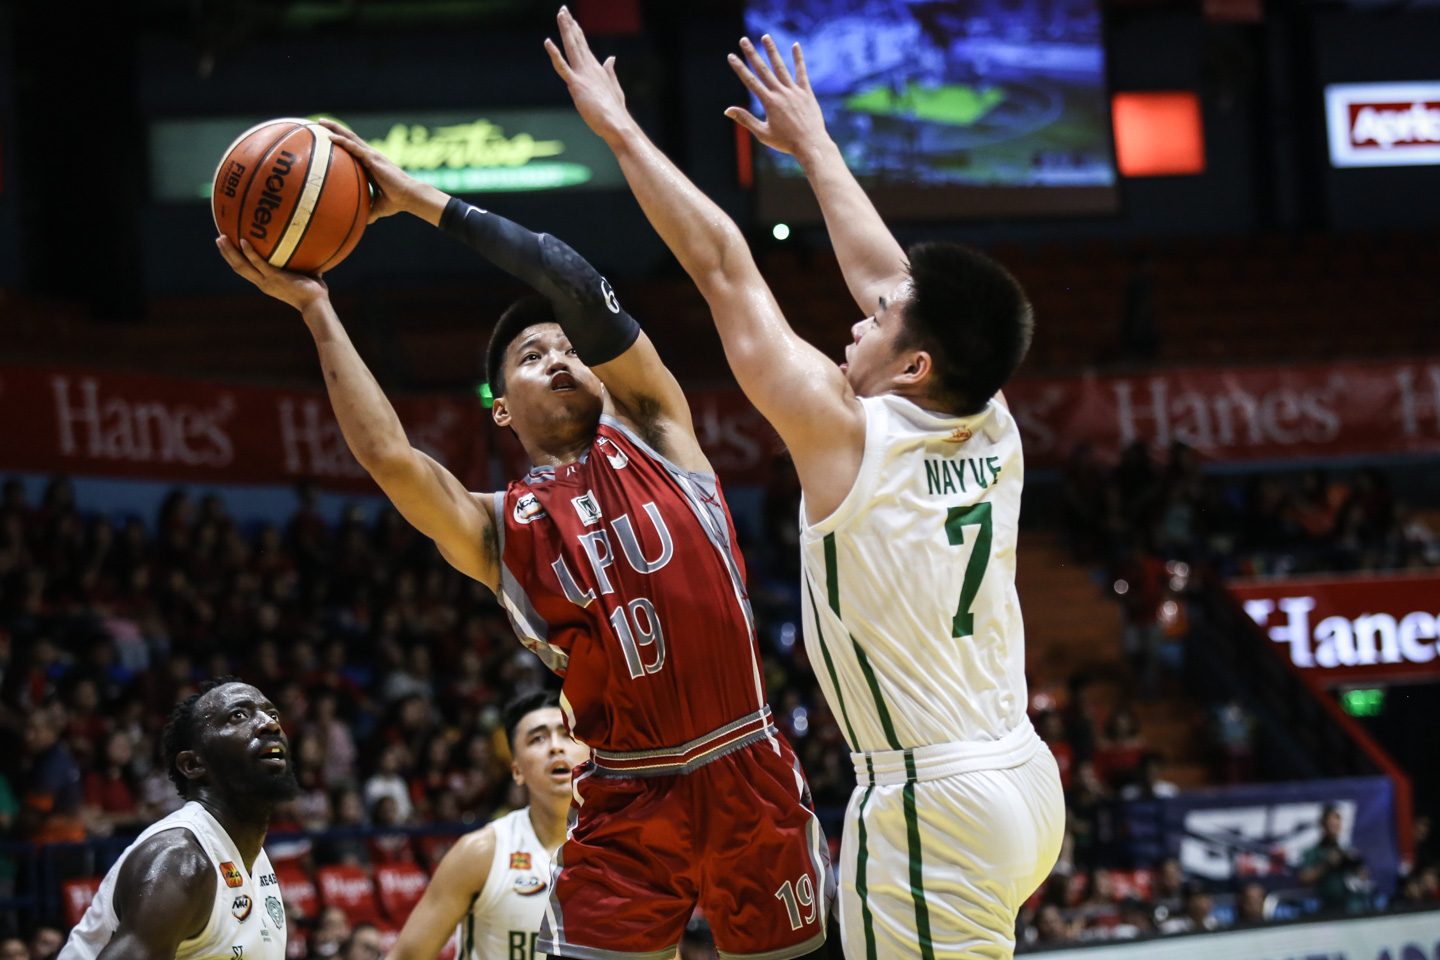 San Beda pounds Perpetual by 46; Lyceum deals Benilde its first loss